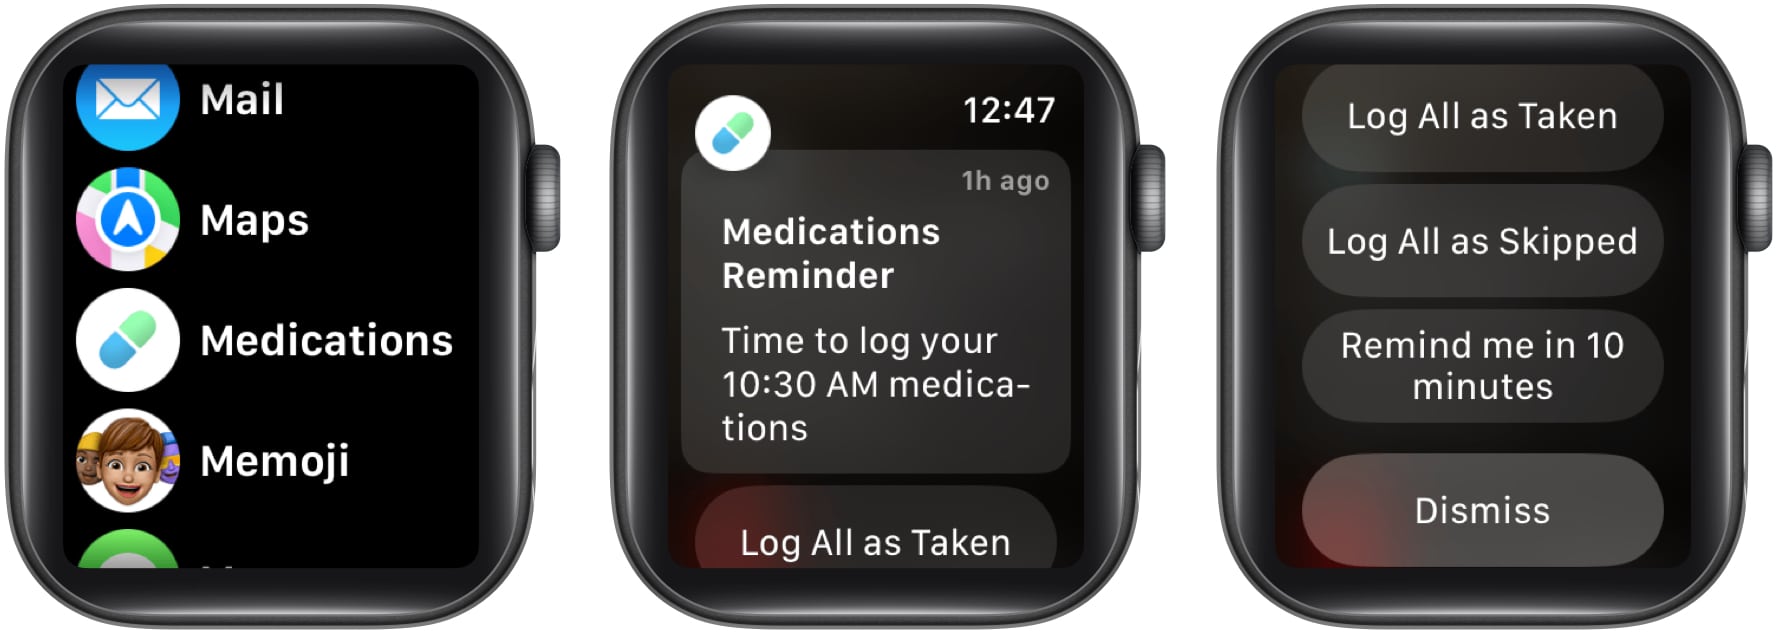 Open Medication app, Select Mediction reminder, and select Log All as Taken or Log All as Skipped